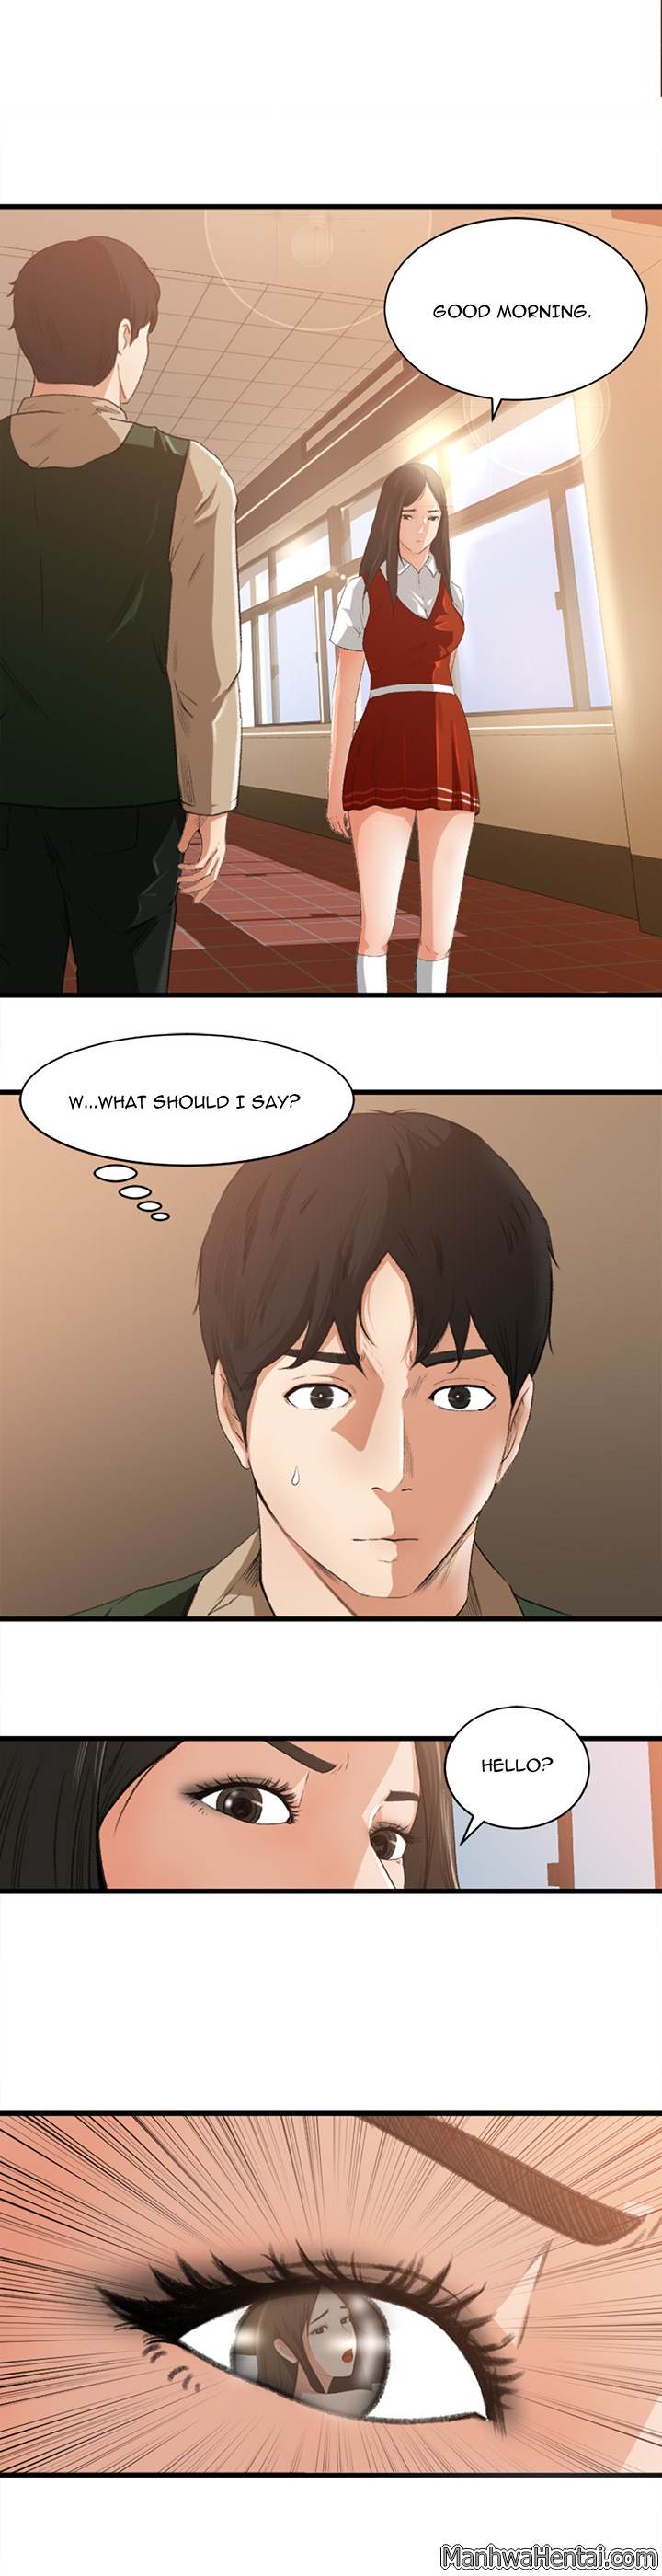 Inside the Uniform - Chapter 6 Page 3